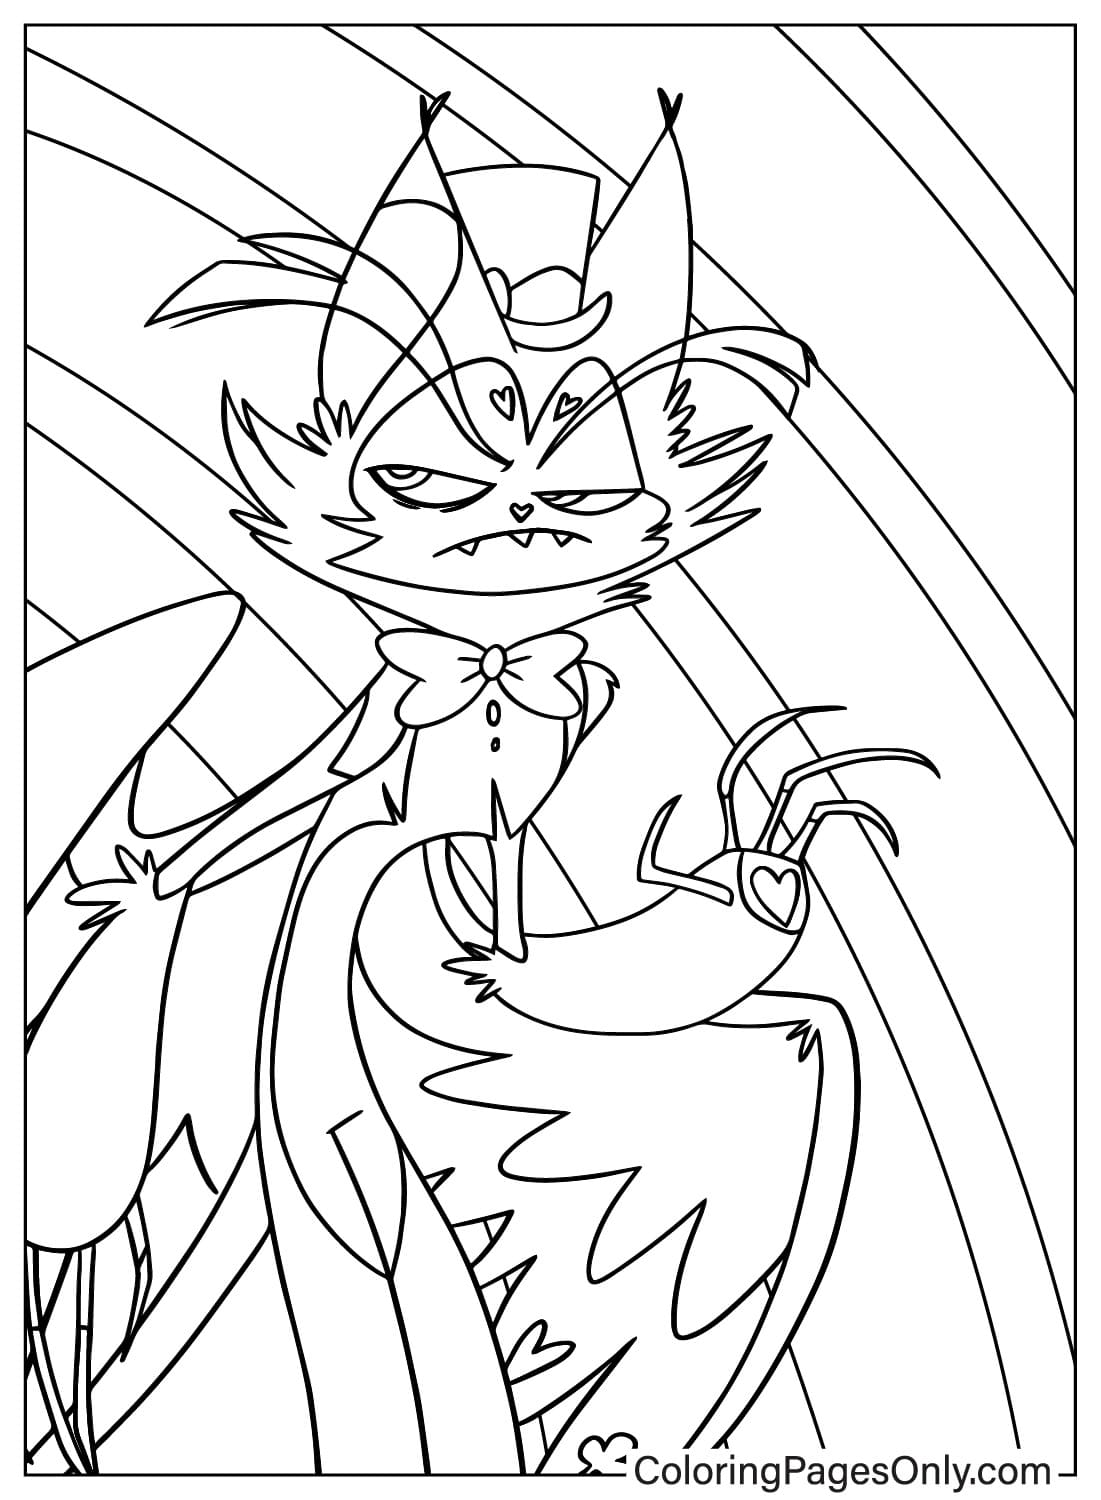 Drawing Husk Coloring Page from Husk